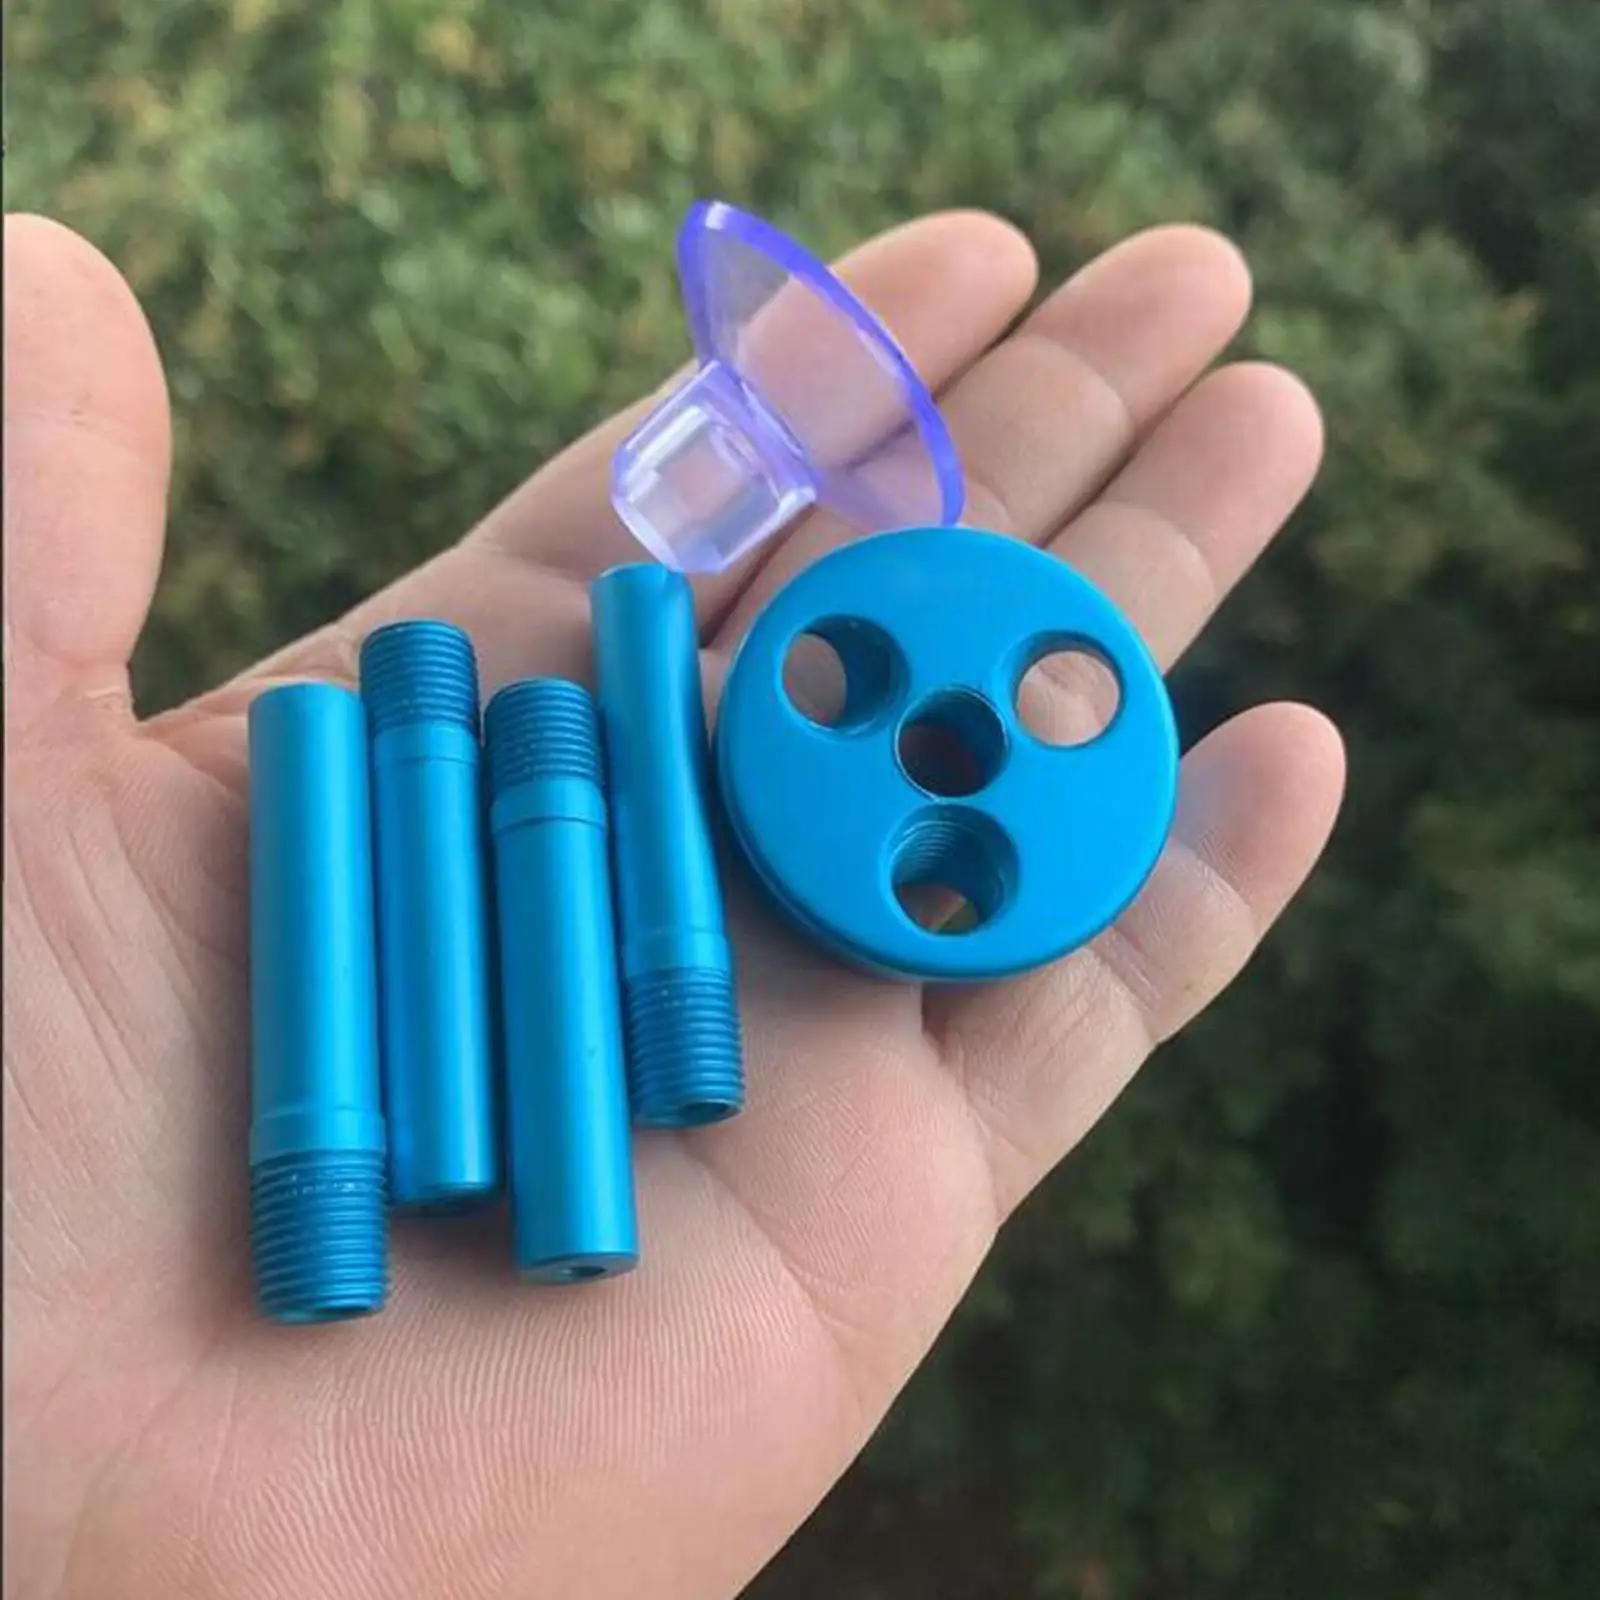 Tent Connections Build Heavy Duty Greenhouse Frame Pipe Fittings Aluminum Alloy Tent Pole Tips Cap for Camping Hiking Tent Tools